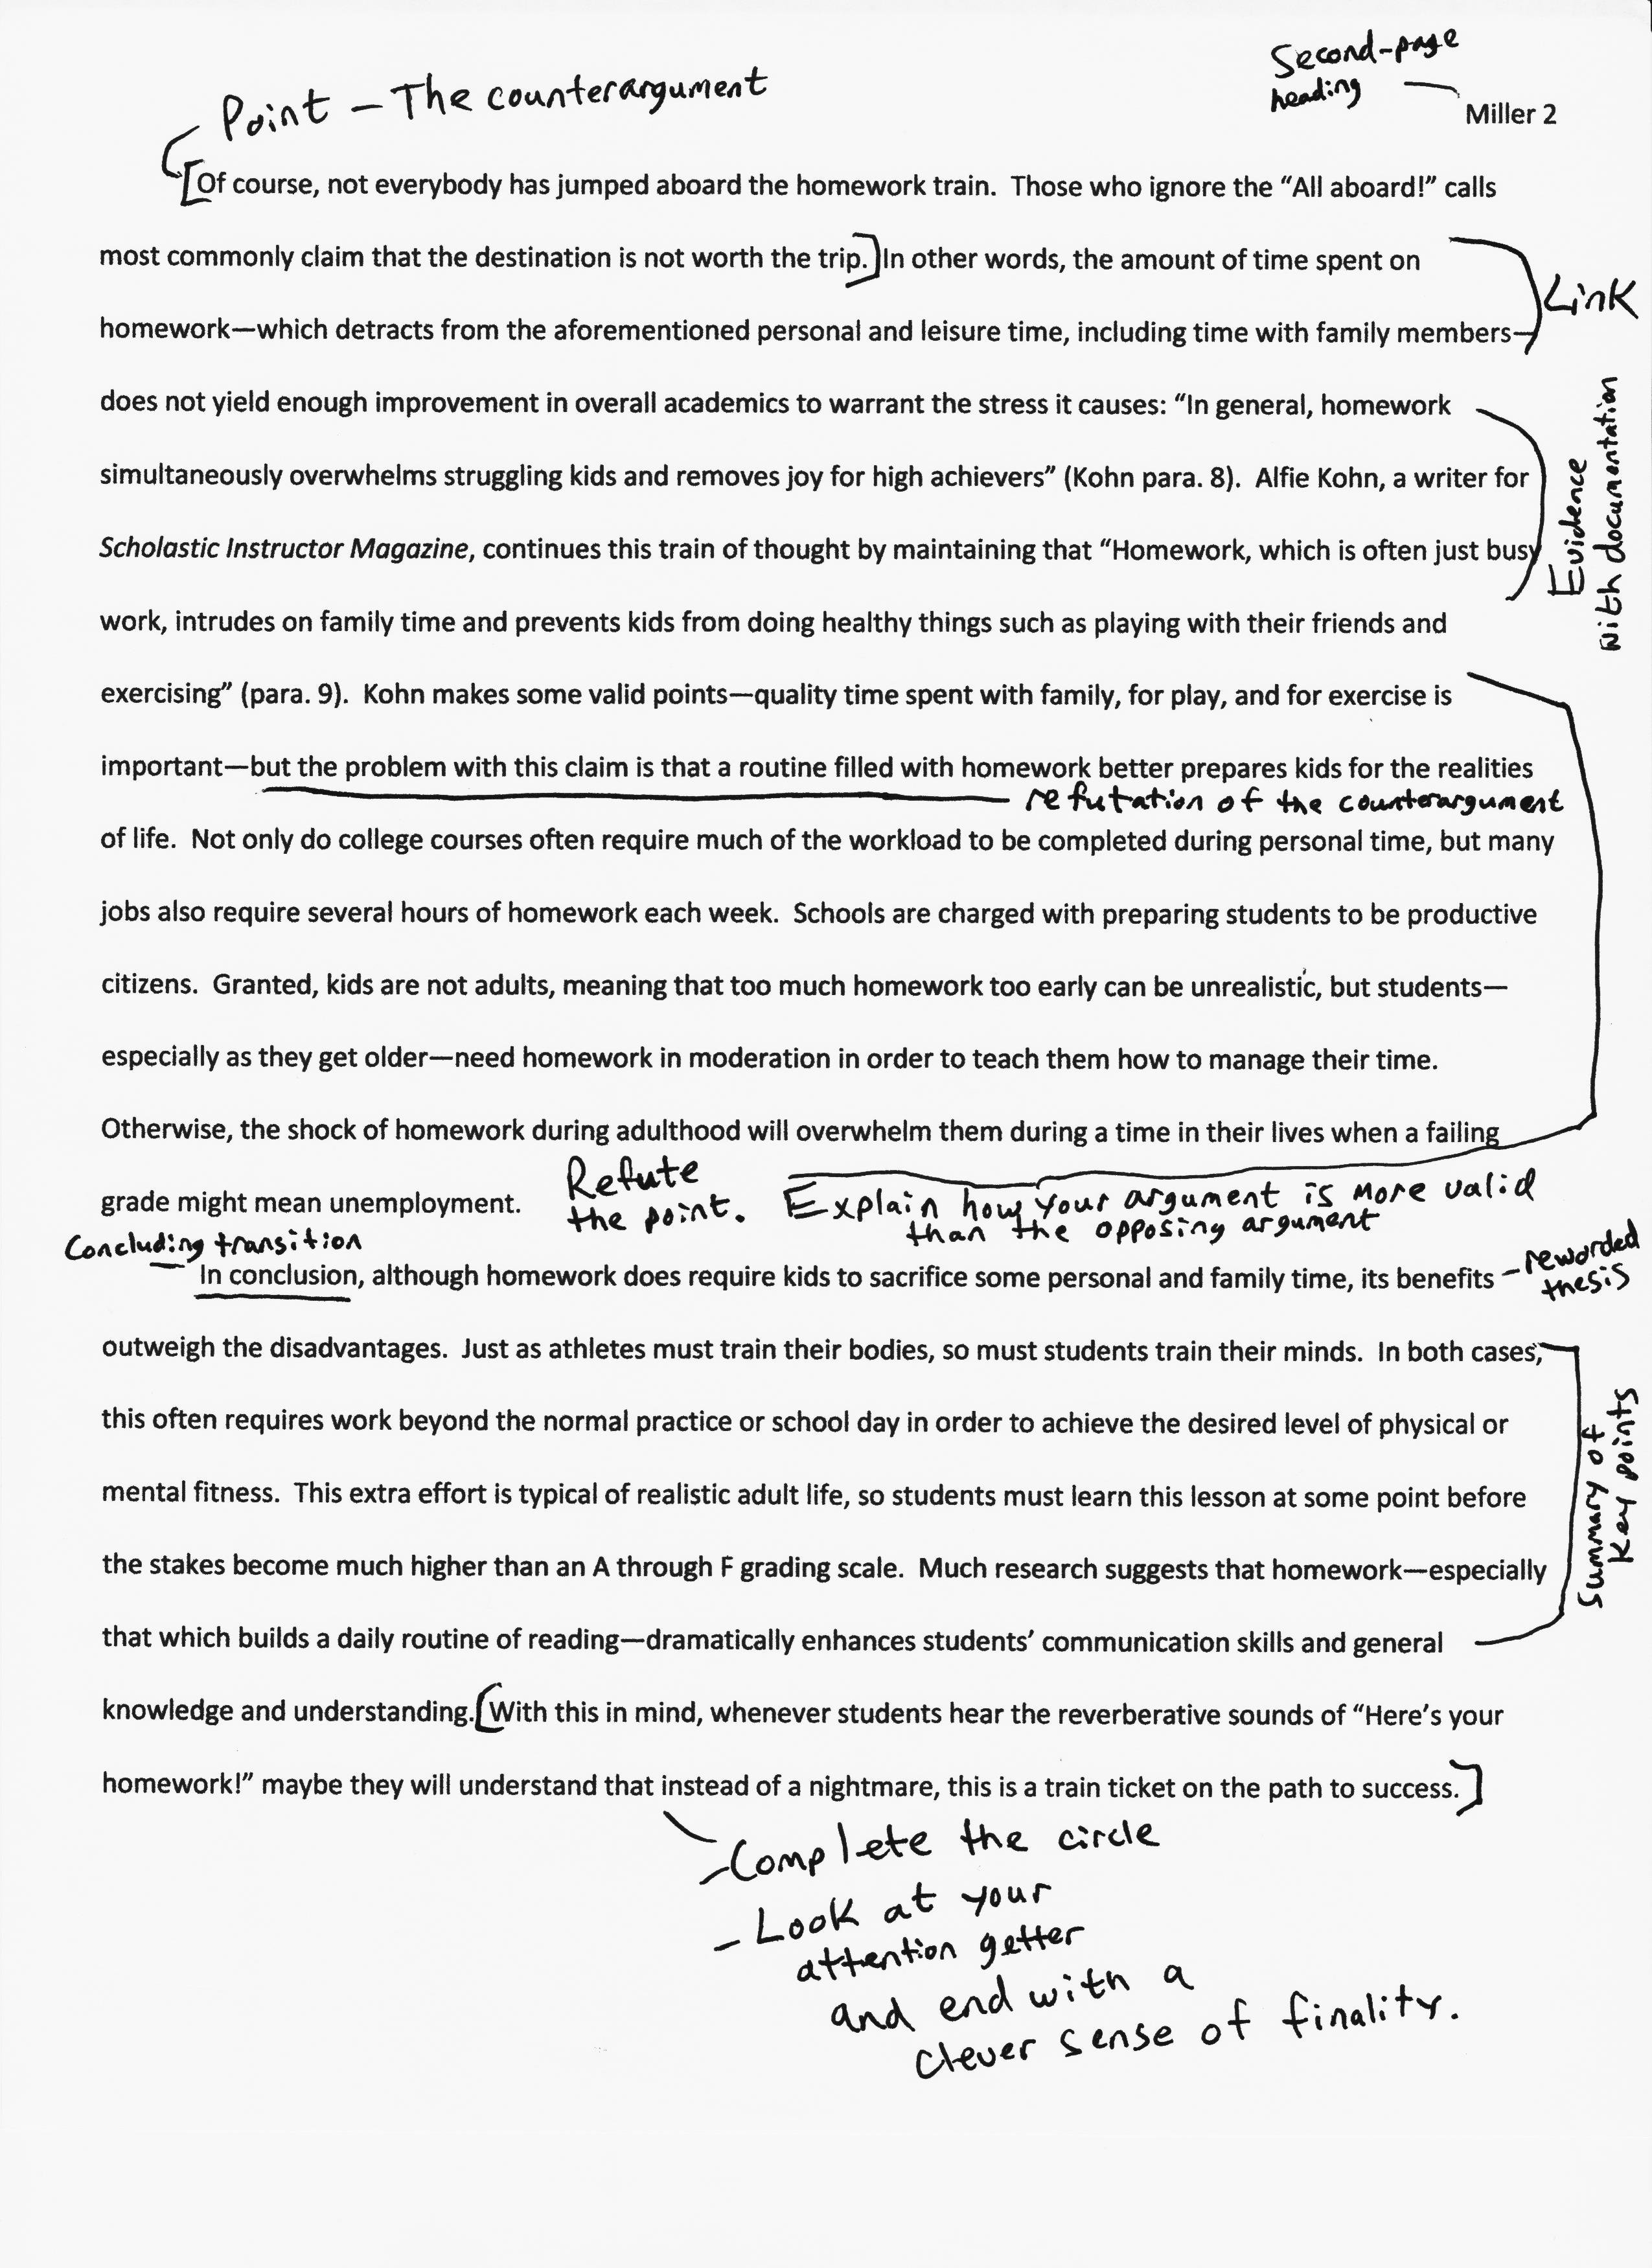 argumentative essay topics for research papers